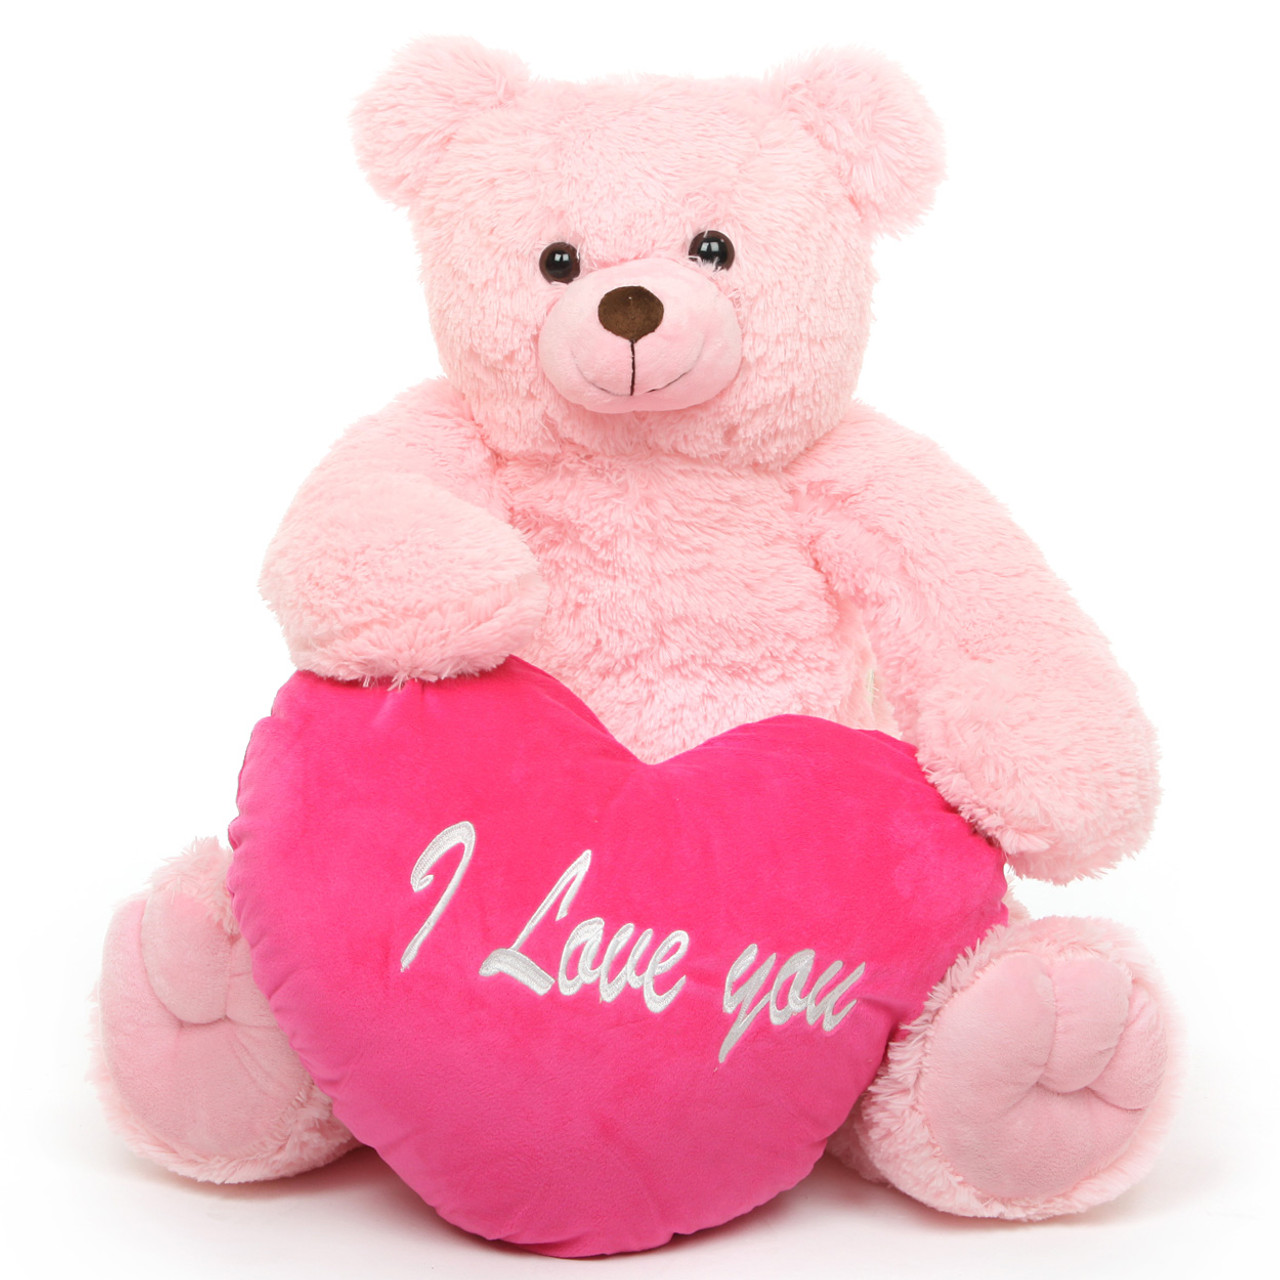 Darling Heart Tubs pink teddy bear with heart 32in